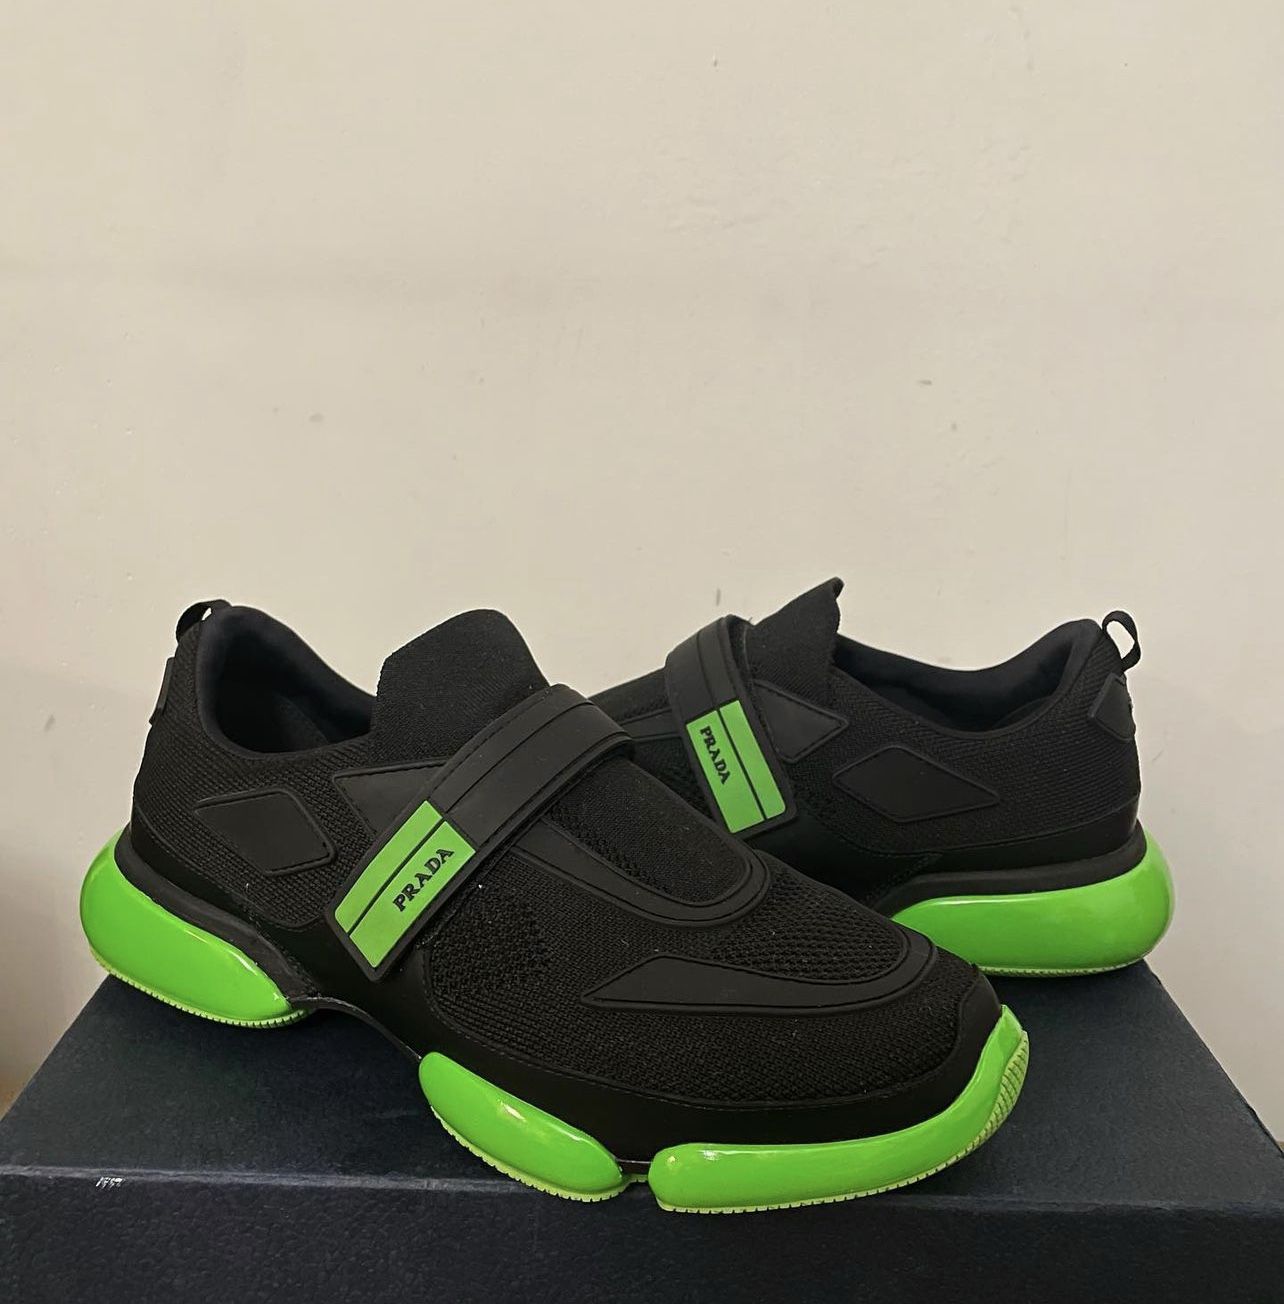 Prada Sneakers Black Green Us Size 7 for Sale in Brooklyn, NY - OfferUp